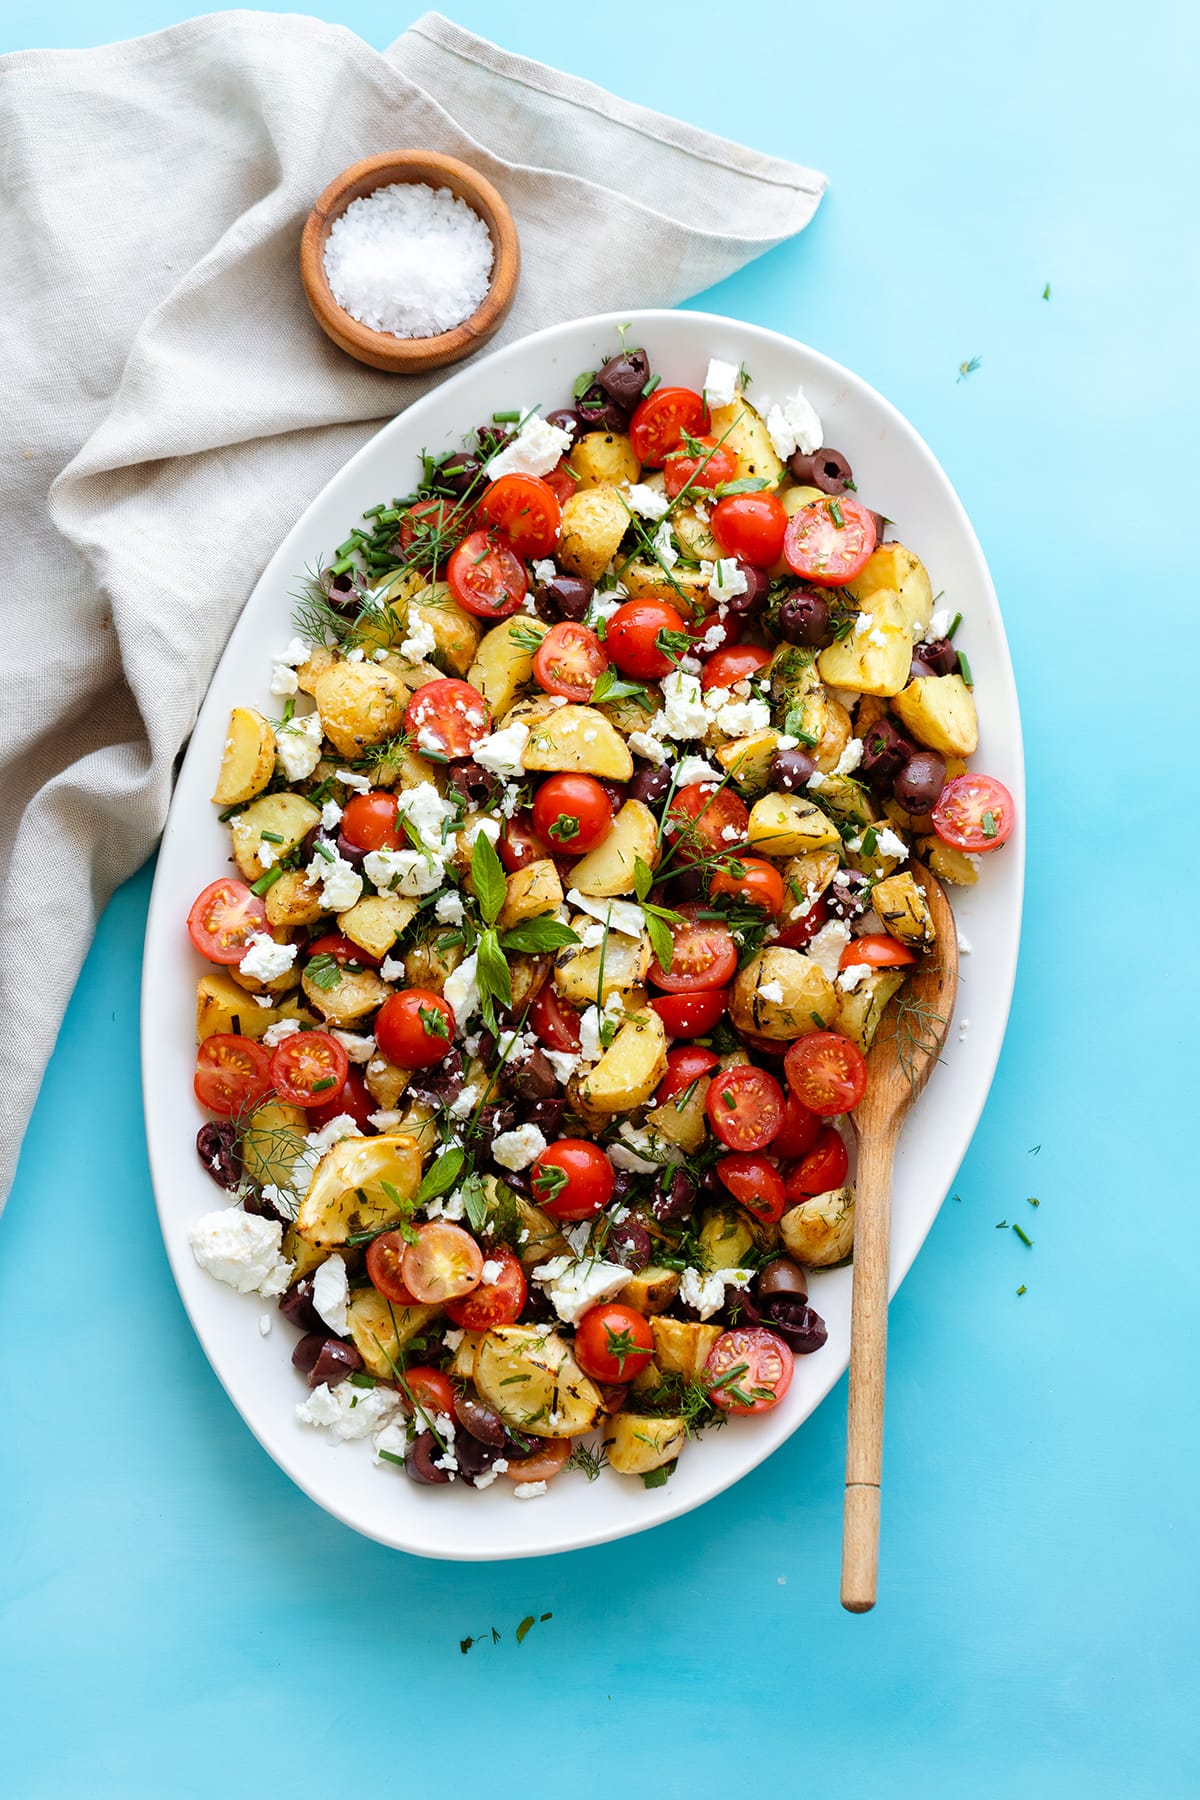 Greek Potato Salad with Feta, Olives, and fresh herbs on an oval platter. Bright blue background